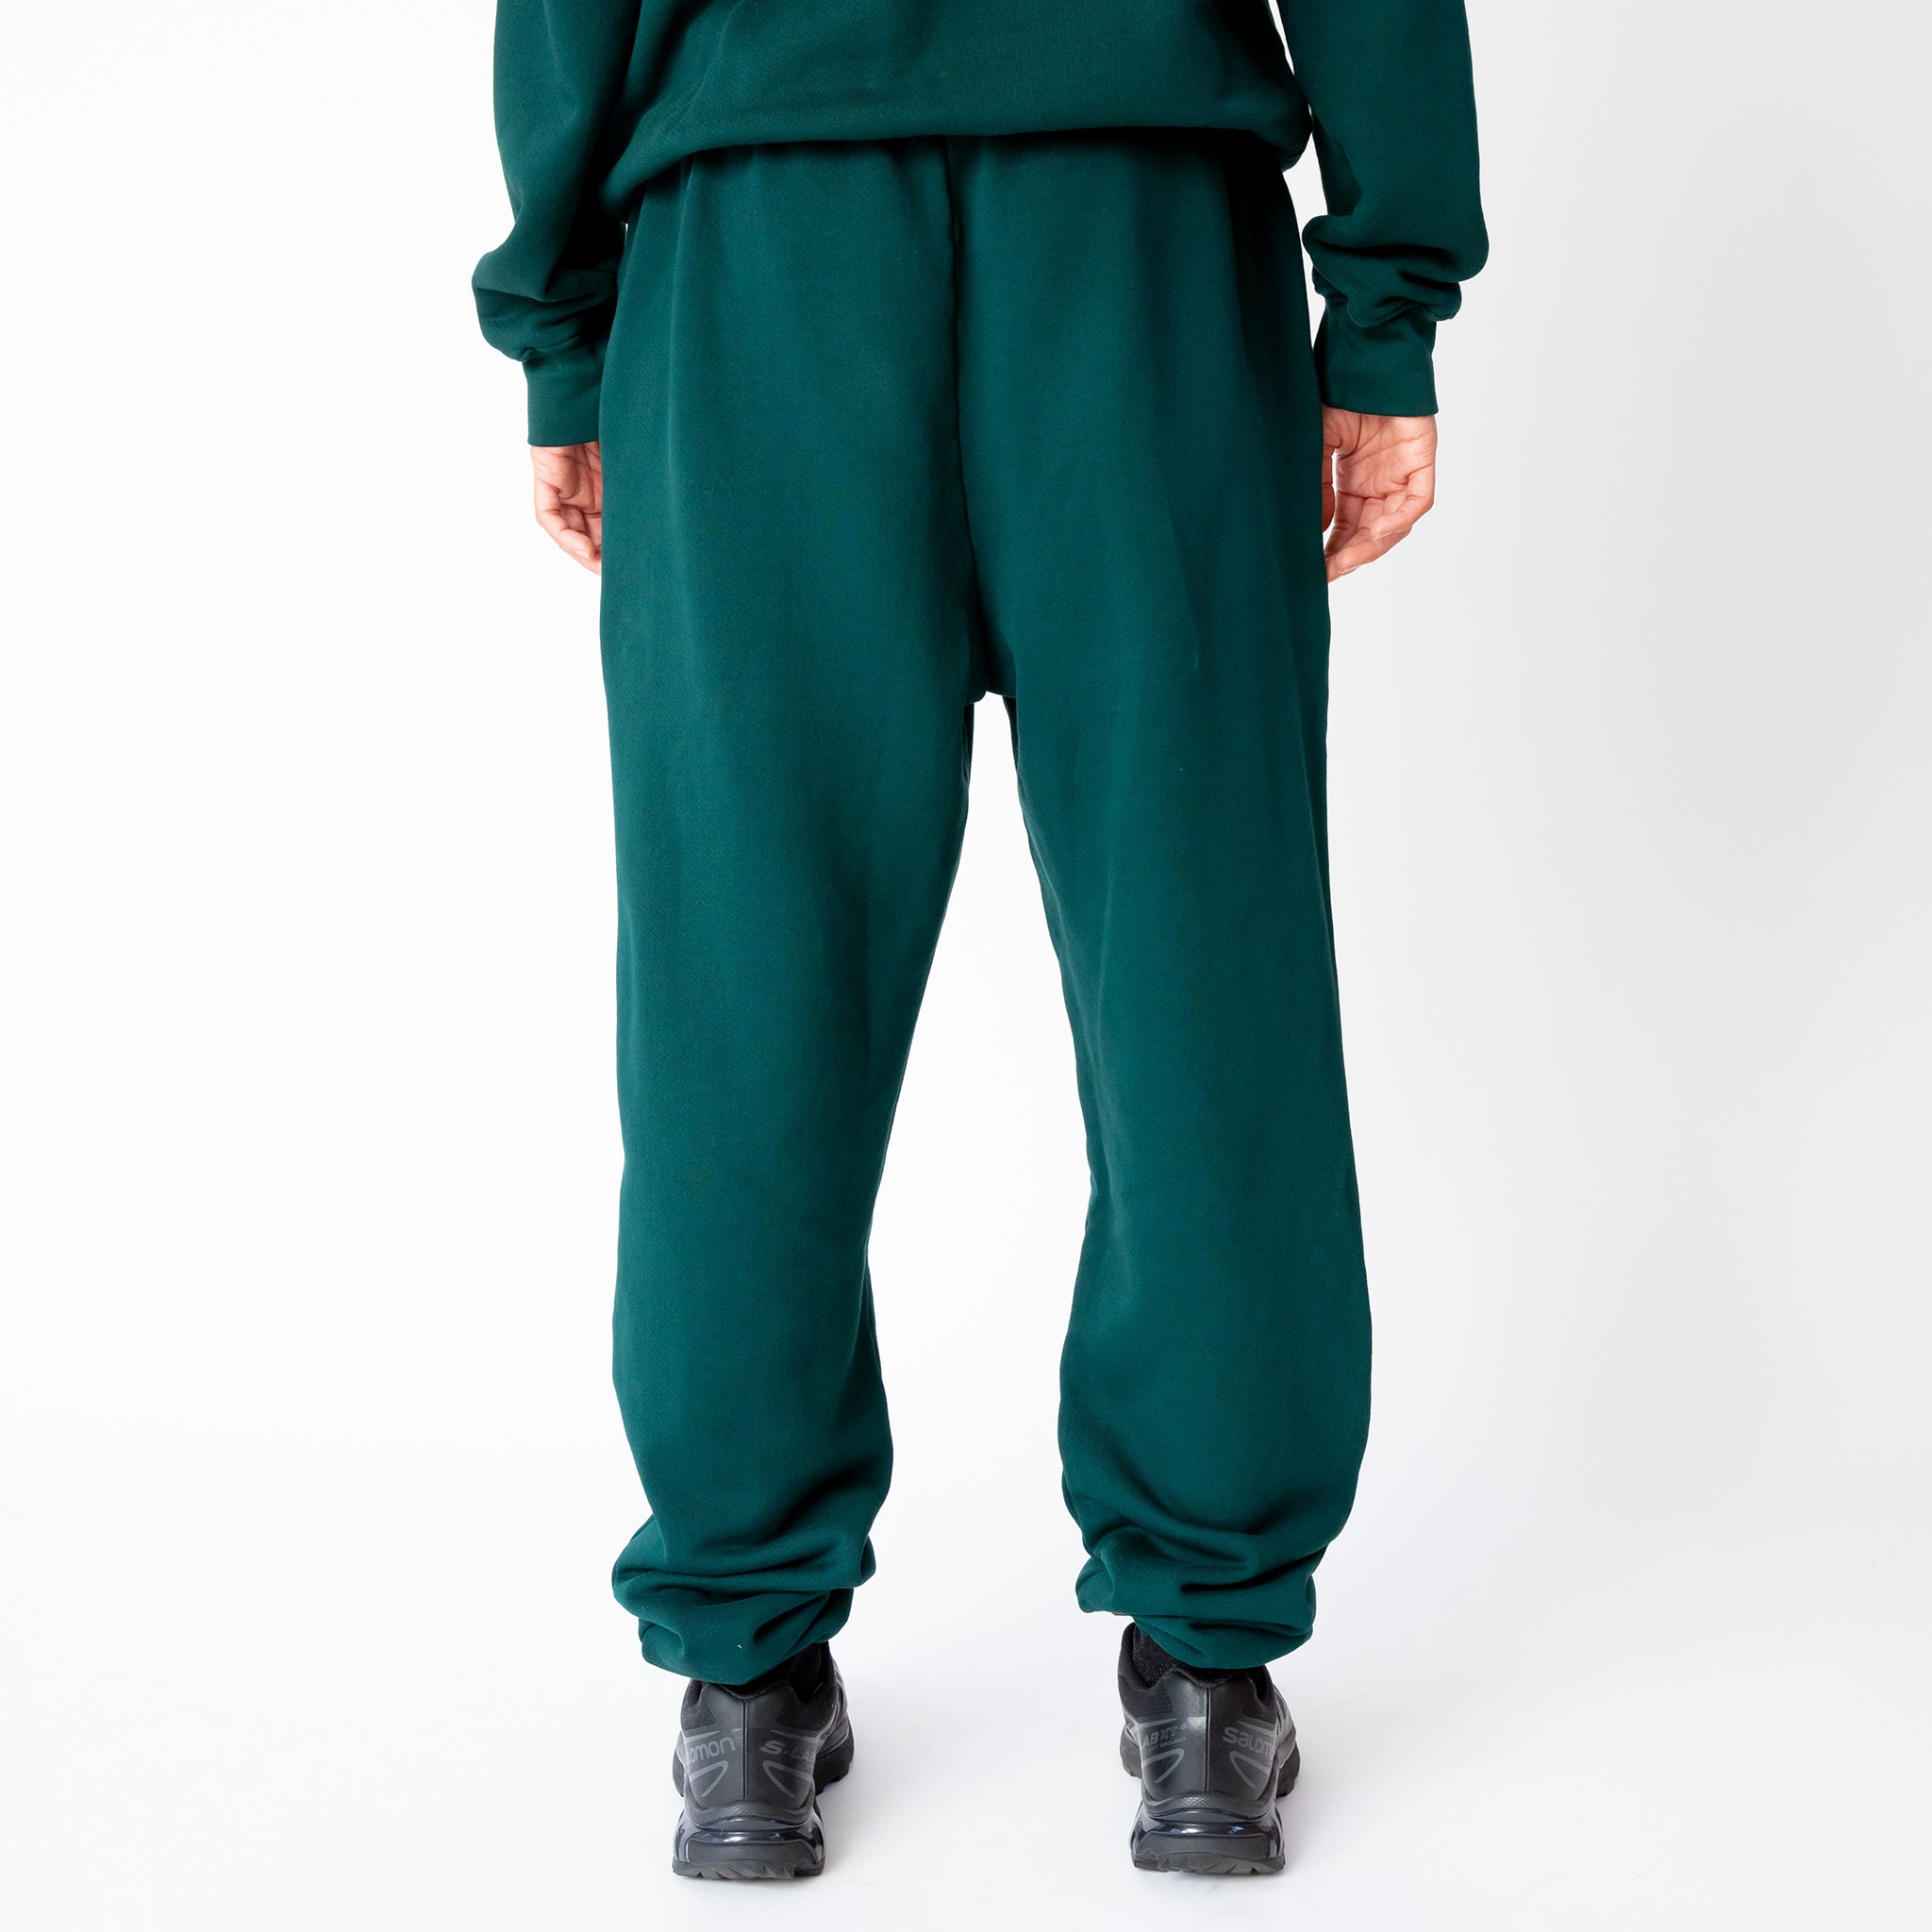 A model wears the classic sweatpant by Les Tien in an emerald green color - back view.